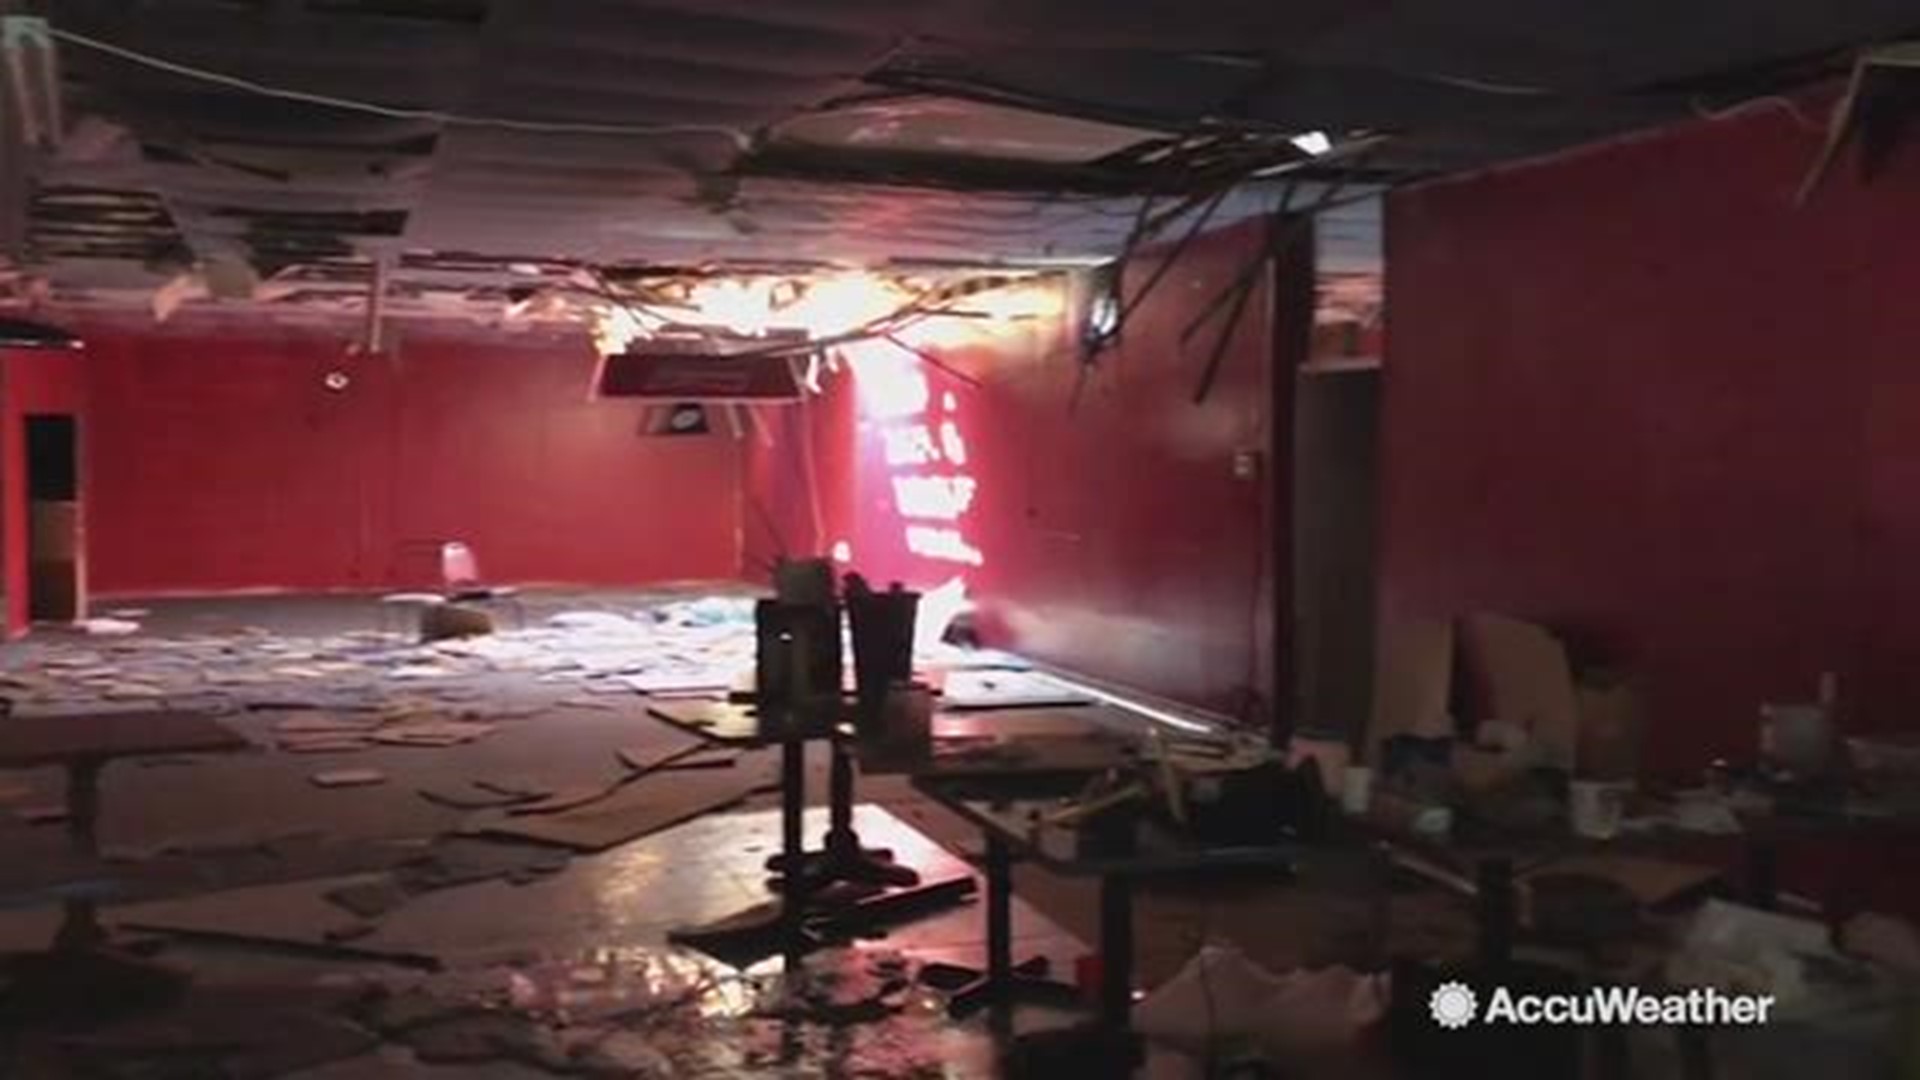 Because they own a pool hall made of concrete blocks, the Burtons decided to ride out Hurricane Michael in their business.  But when the eye of Michael passed directly over them, they didn't think they'd survive. AccuWeather's Jonathan Petramala shares th